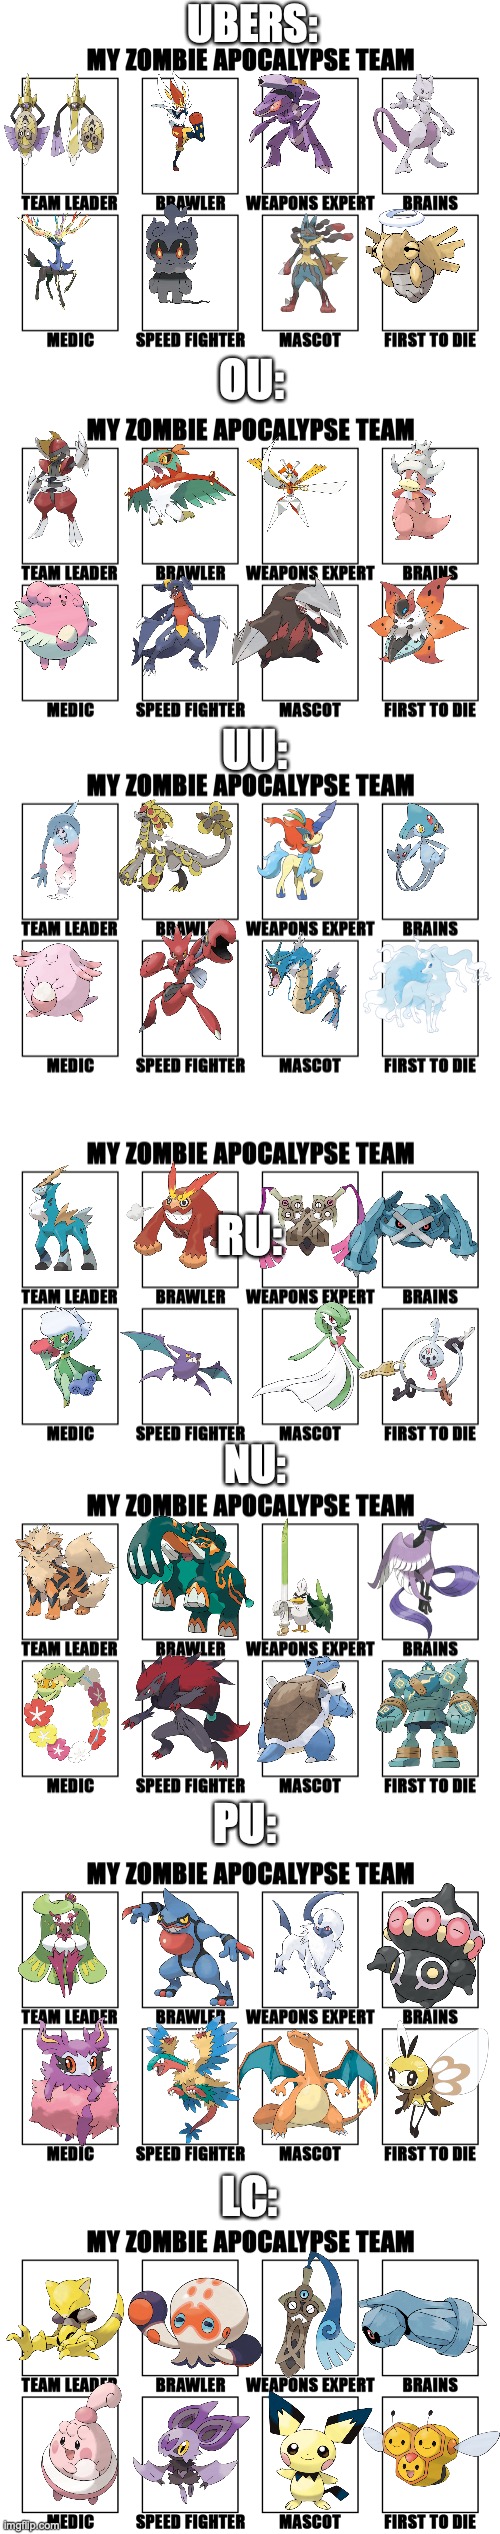 Zombie apocalypse team for every Smogon tier | UBERS:; OU:; UU:; RU:; NU:; PU:; LC: | image tagged in my zombie apocalypse team v2 memes | made w/ Imgflip meme maker